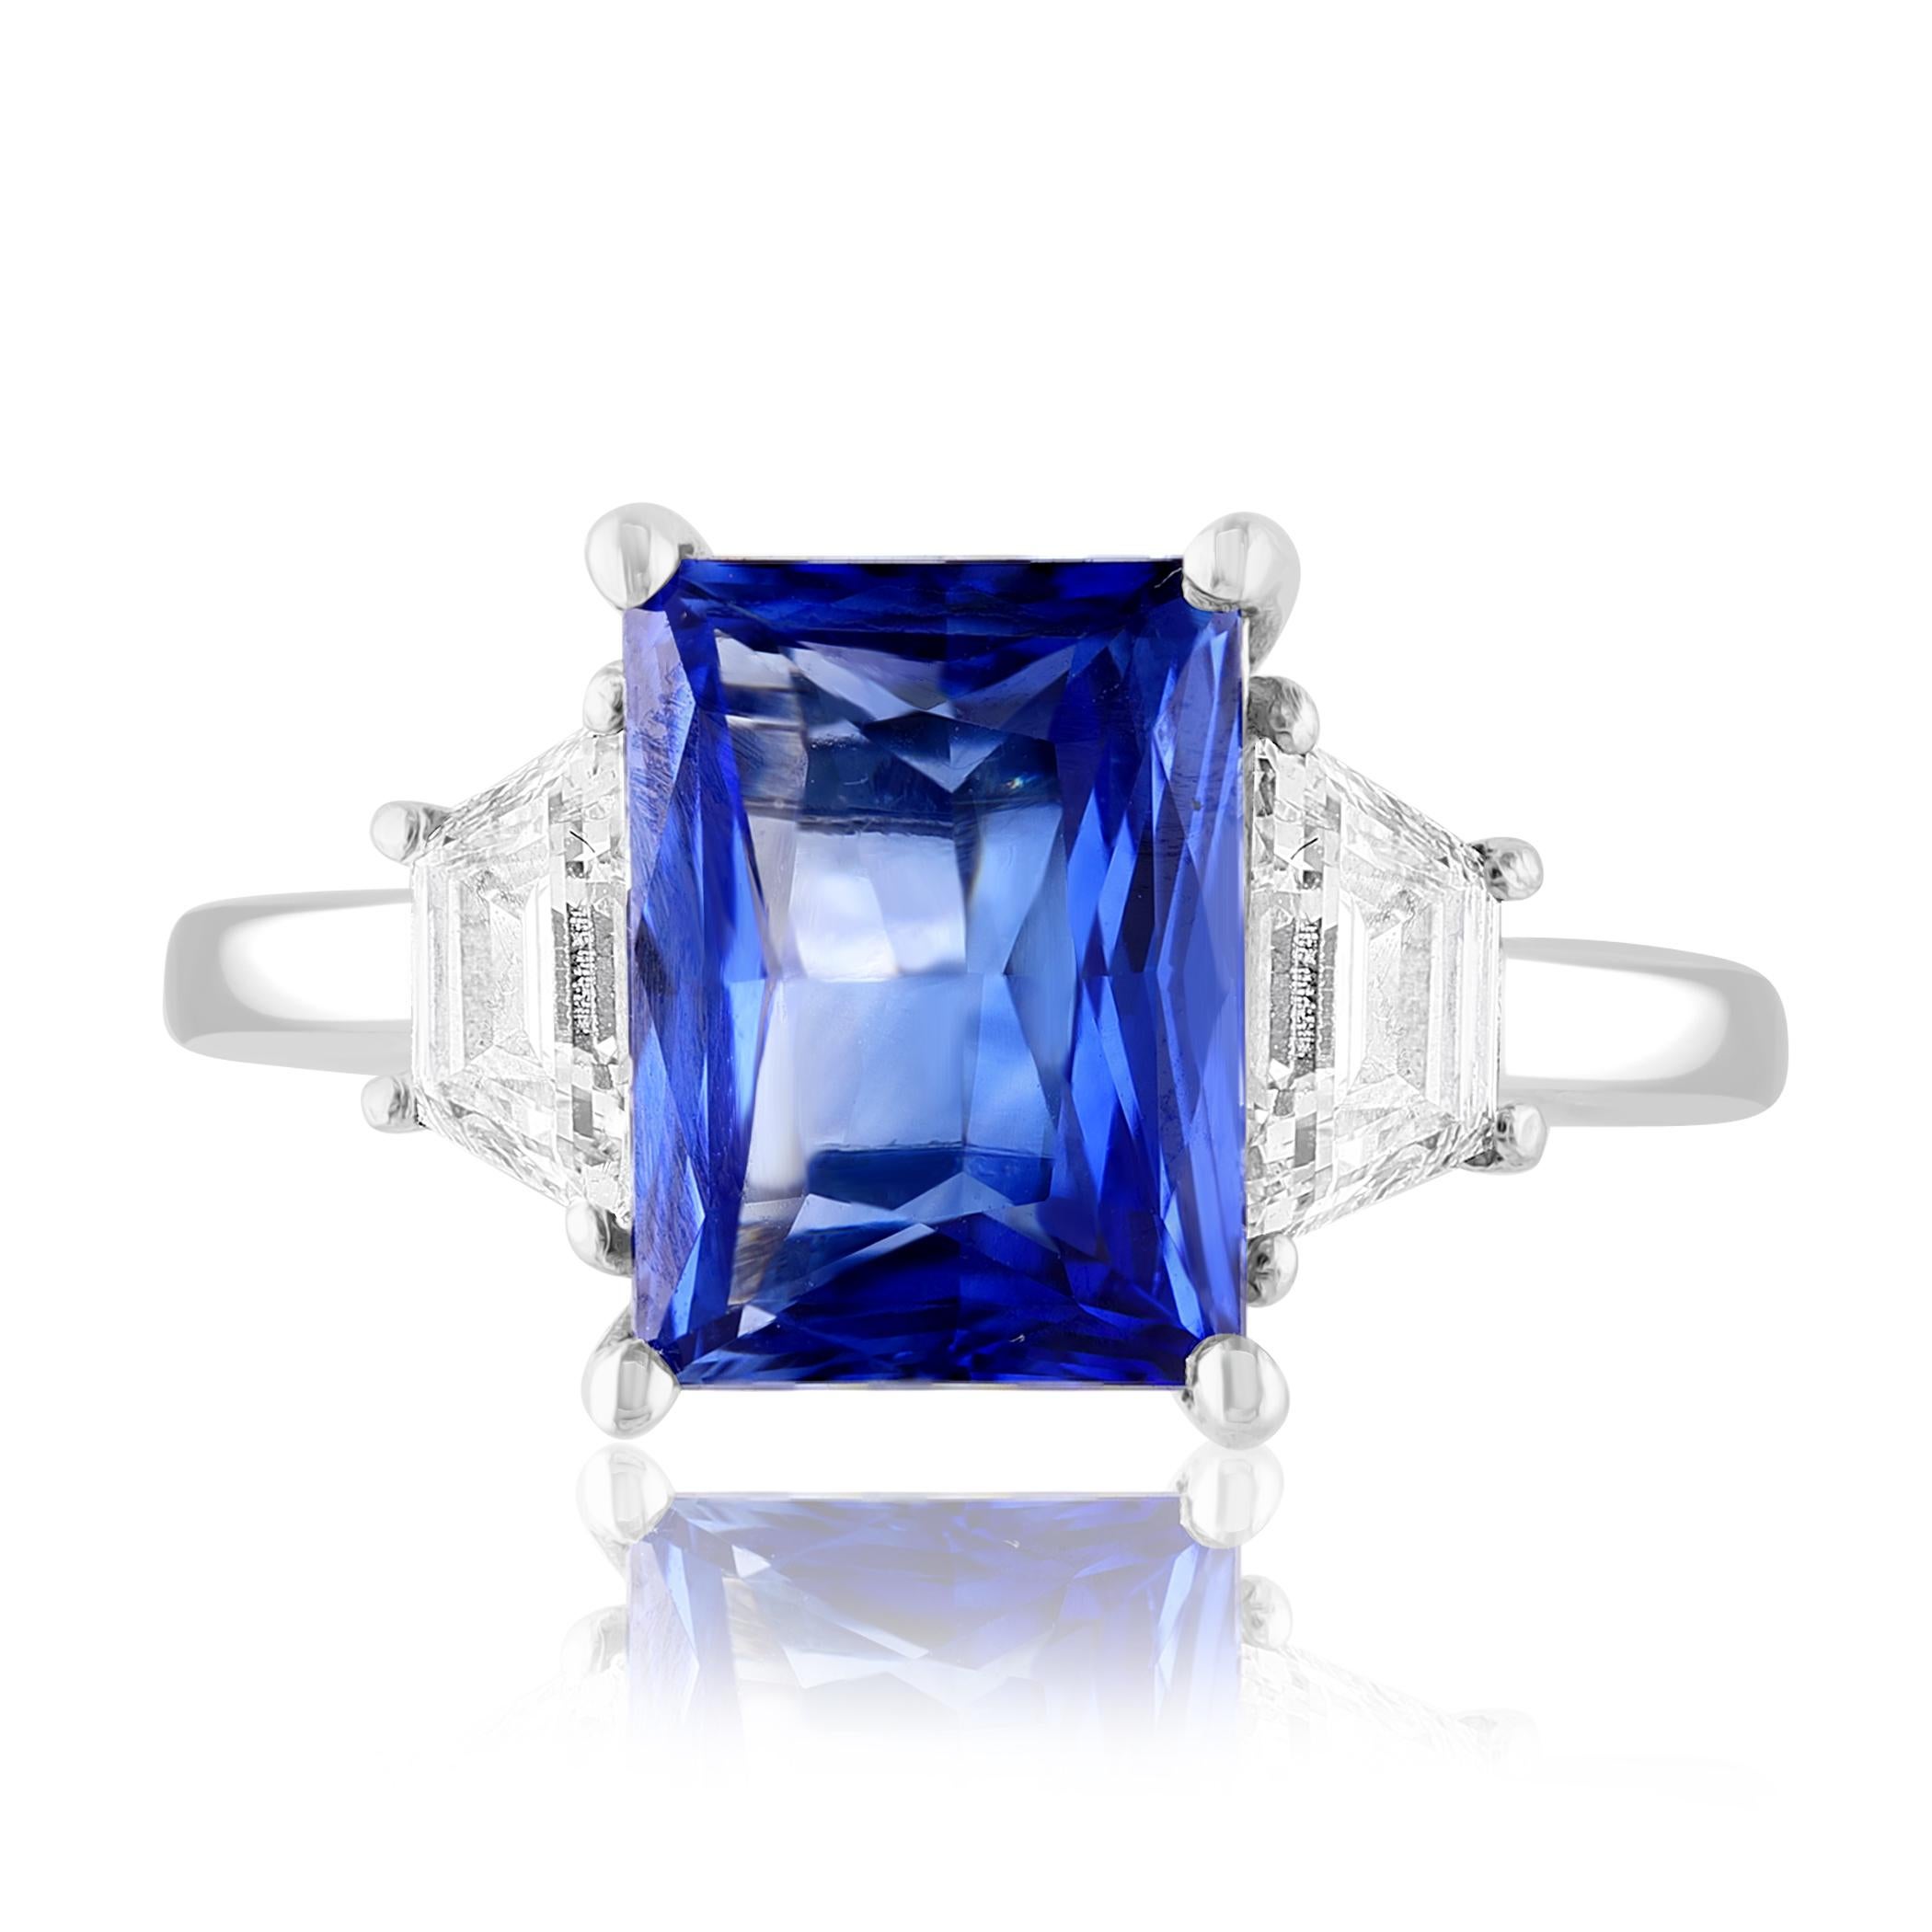 Showcasing Emerald cut, Vibrant color Blue Sapphire weighing 3.06 carats, flanked by two brilliant cut trapezoid diamonds weighing 0.92 carats total. Elegantly set in a polished platinum composition.